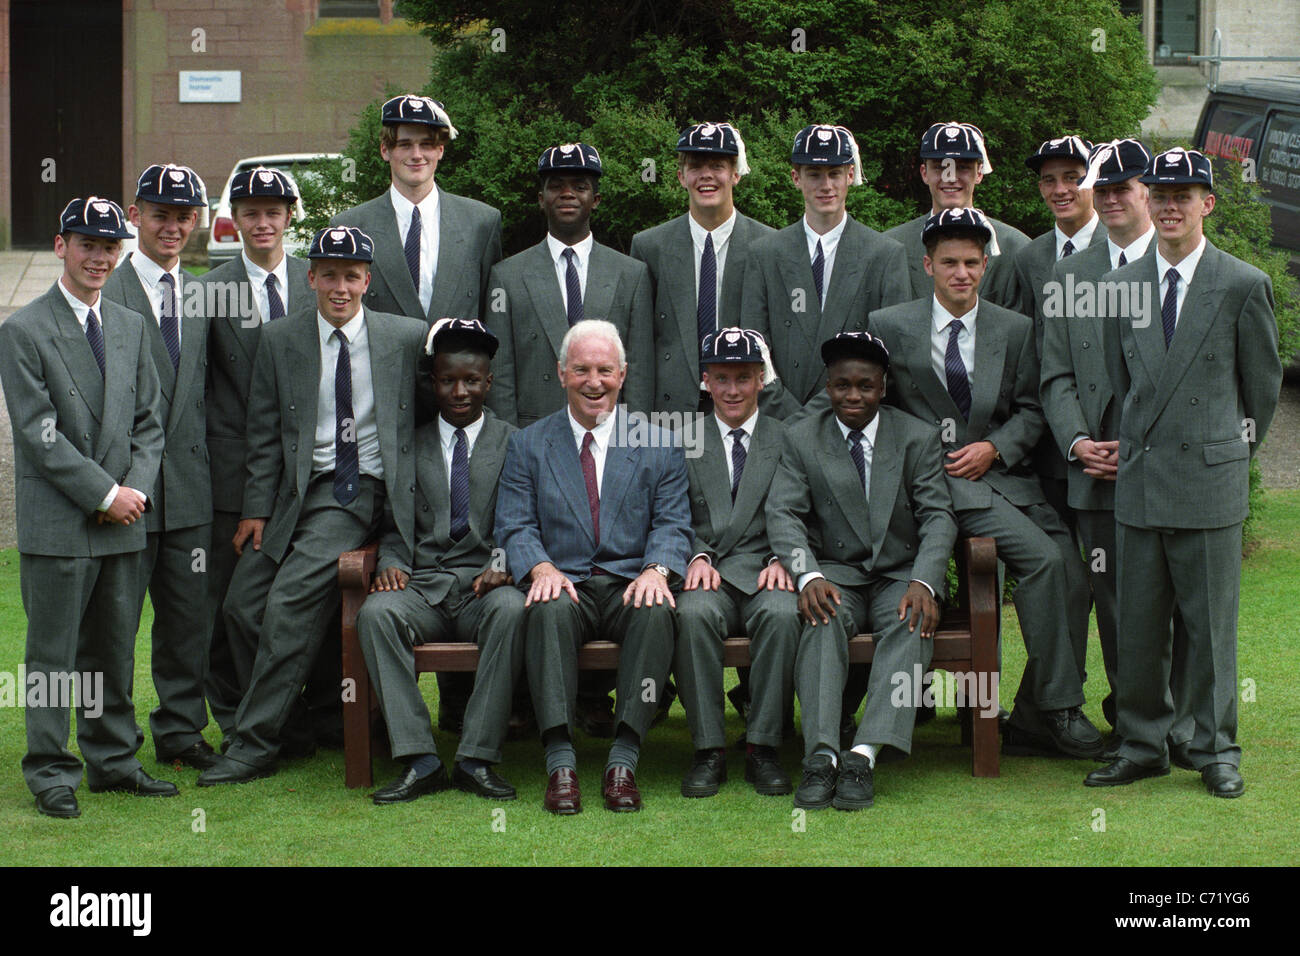 England coach Dave Sexton with the England Football Association school of excellence graduates. The Class of '93 at the FA School of Excellence at Lilleshall Hall, which honed the talents of some of England's most promising young footballers. Here the graduates pose with Dave Sexton, the FA school's former technical director, in July 1993. The graduates that year were David Beresford, Albert Clarke, Neil Cutler, Clinton Ellis, Jamie Howell, Richard Hurst, Andrew Lovelock, Jonathan O'Connor, Steven Pass, Gary Pearson, Mark Peters, Ian Smith, Simon Spencer, Matthew Thorp, Dene White, Simon Wood. Stock Photo